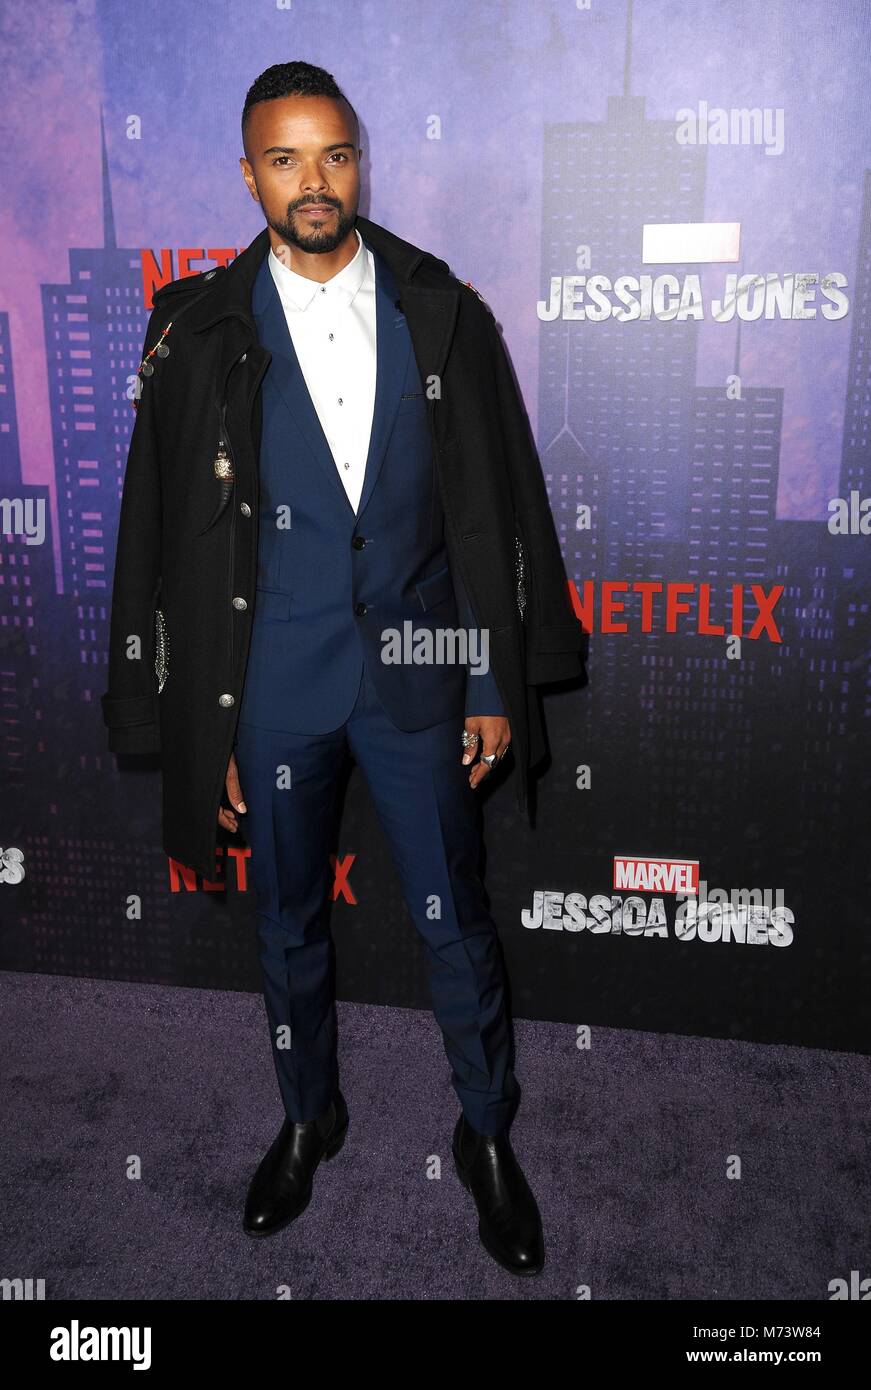 Eka Darville at arrivals for MARVEL’S JESSICA JONES Season 2 Premiere, AMC Loews Lincoln Square, New York, NY March 7, 2018. Photo By: Kristin Callahan/Everett Collection Stock Photo